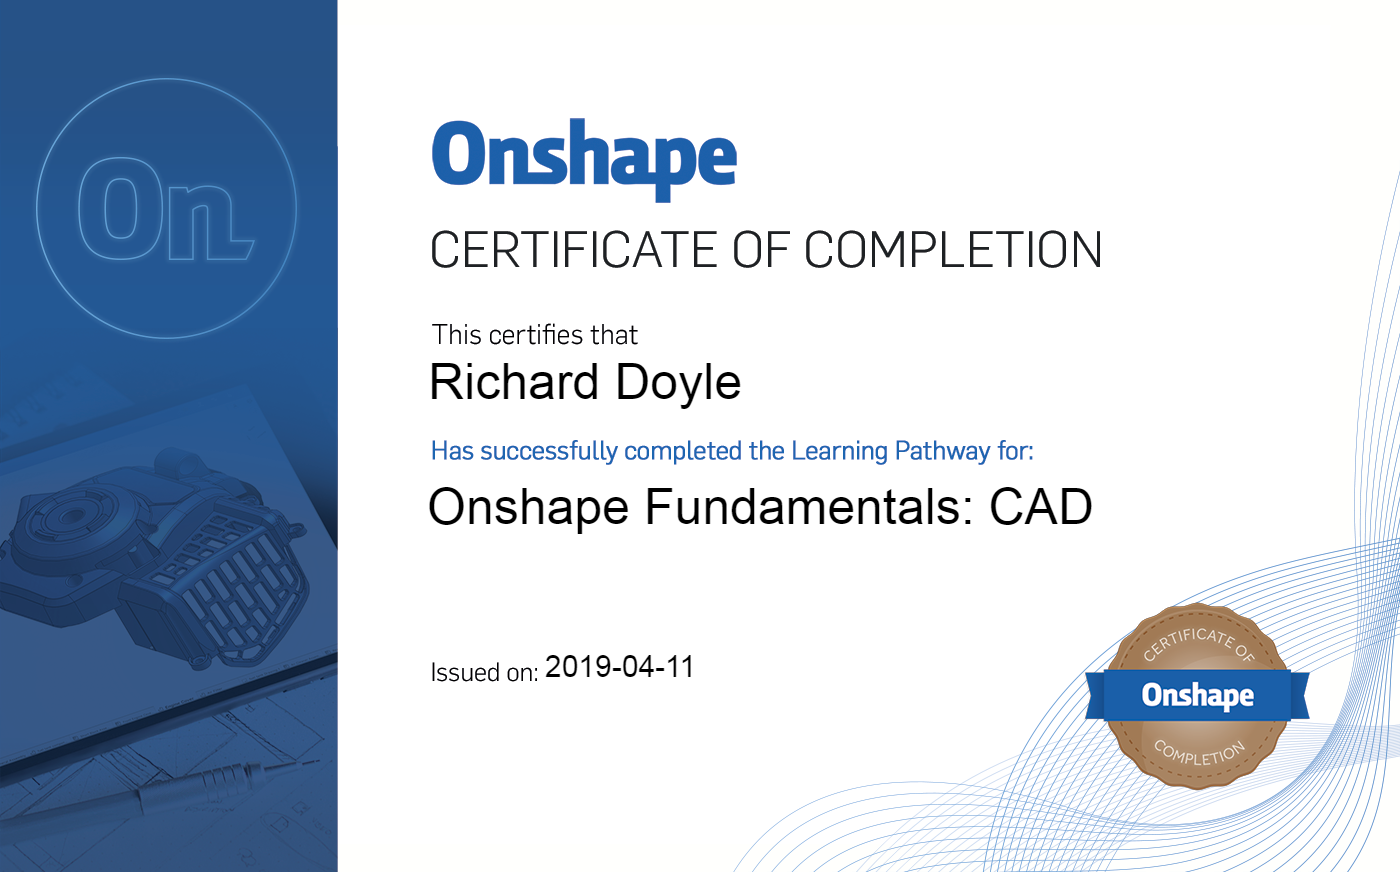 Screenshot of a completion certificate for finishing the online Onshape Fundamentals course.